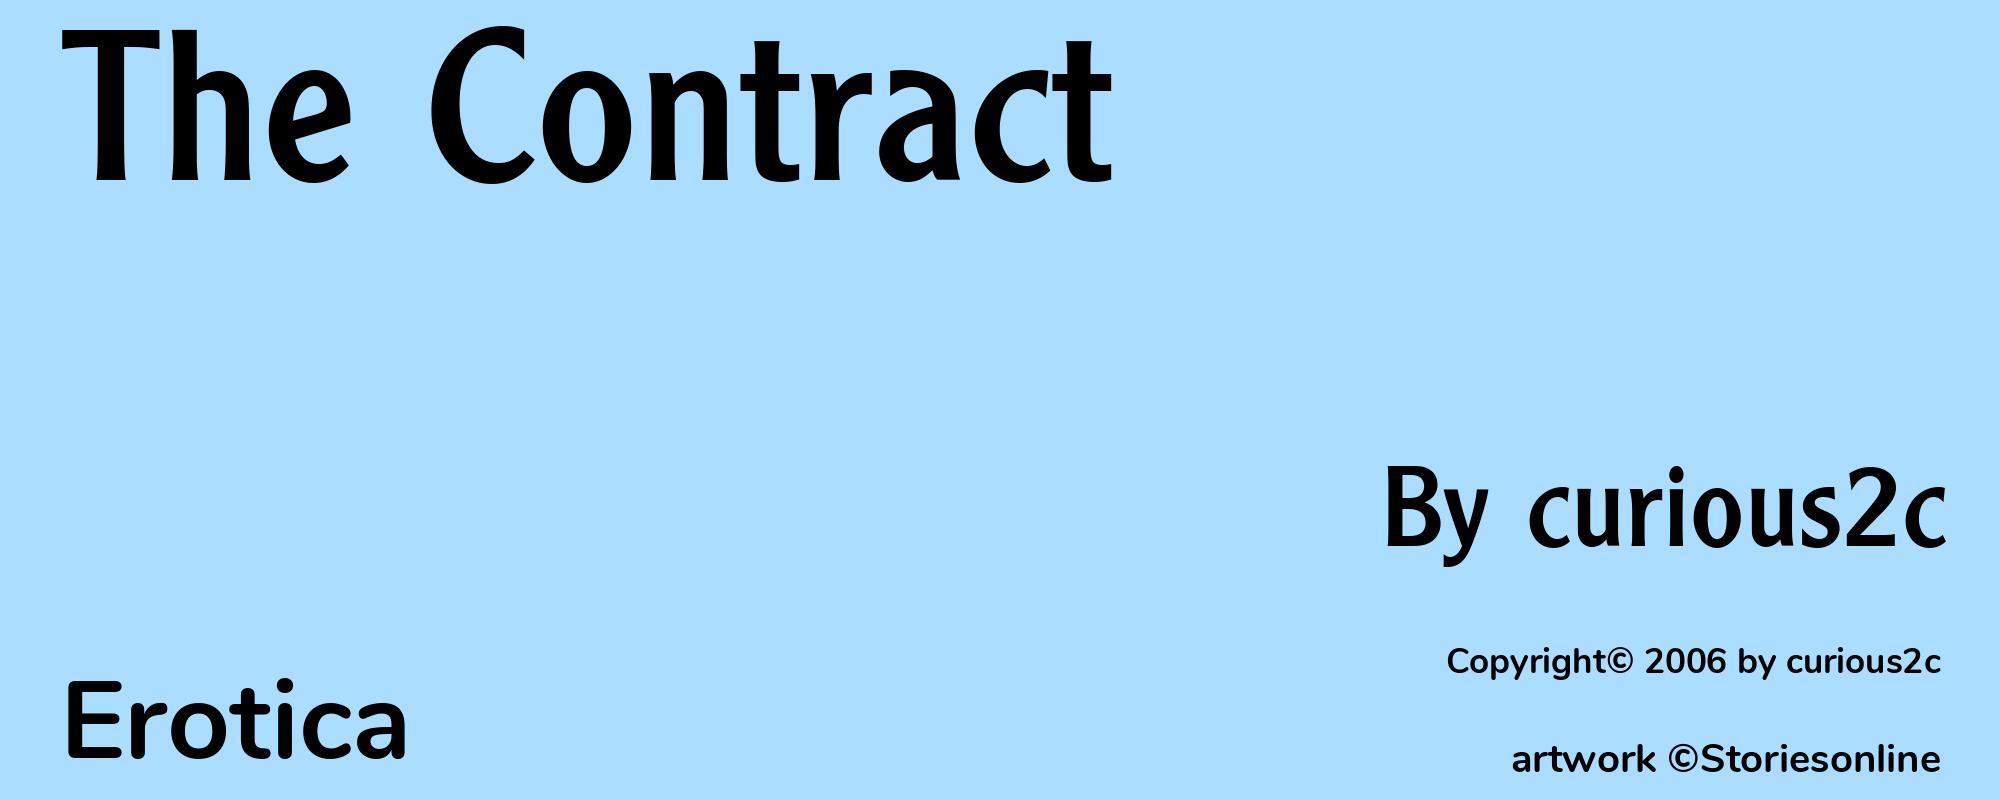 The Contract - Cover